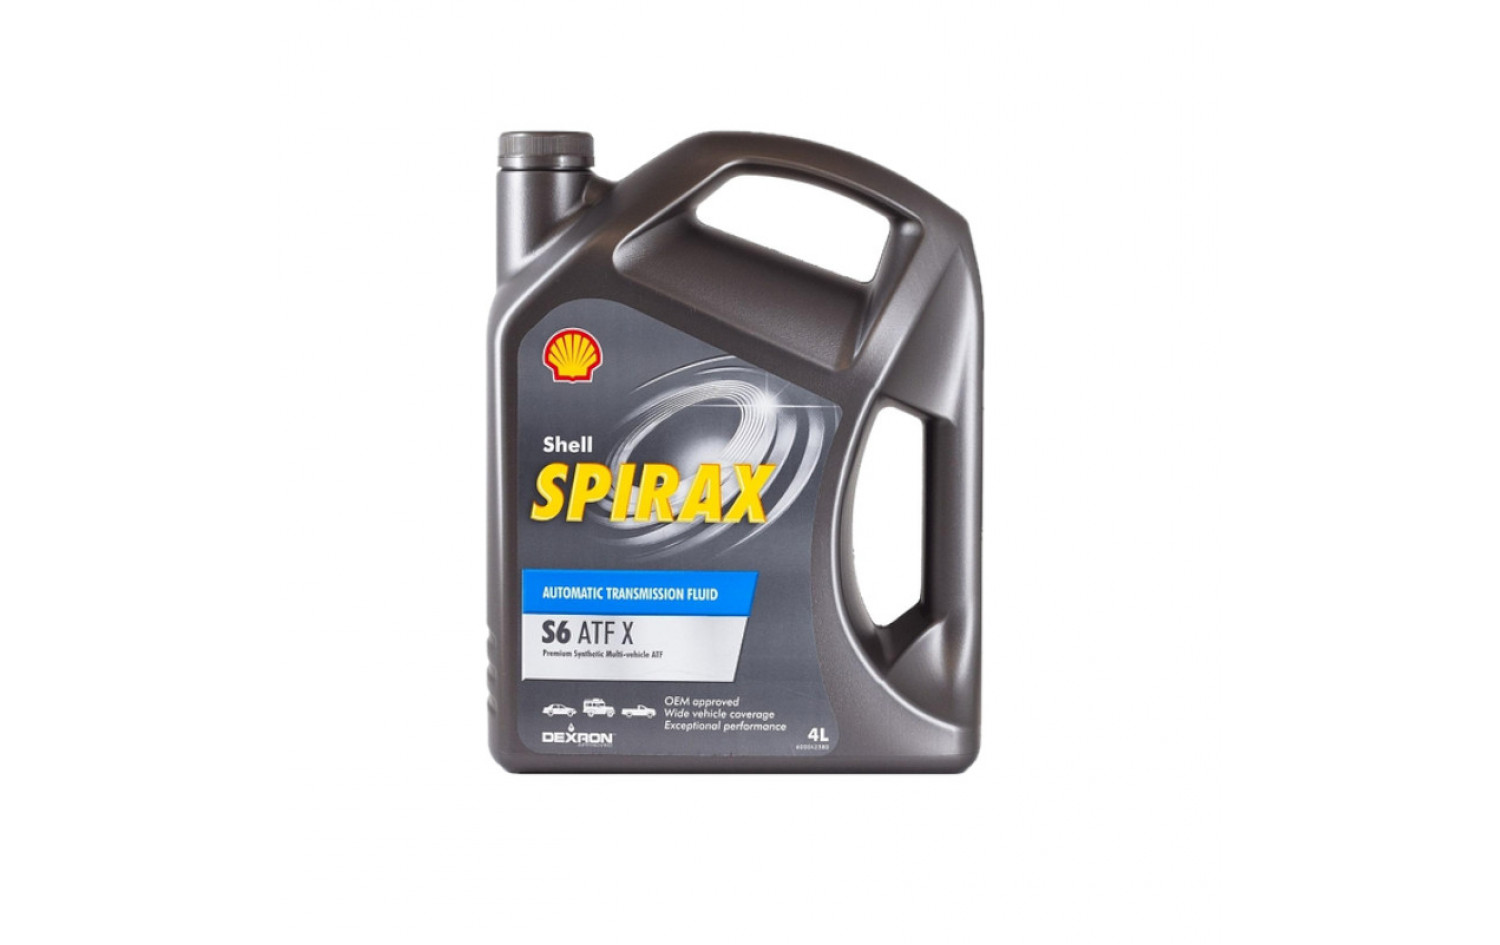 Shell s6 atf x. Масло трансмиссионное Shell Spirax s6 ATF X 4 Л 550048808. Shell Spirax s6 ATF X 4л. 550048808 - Shell Spirax s6 ATF X 4l. Трансмиссионное масло Shell Spirax s6 ATF X 4l.